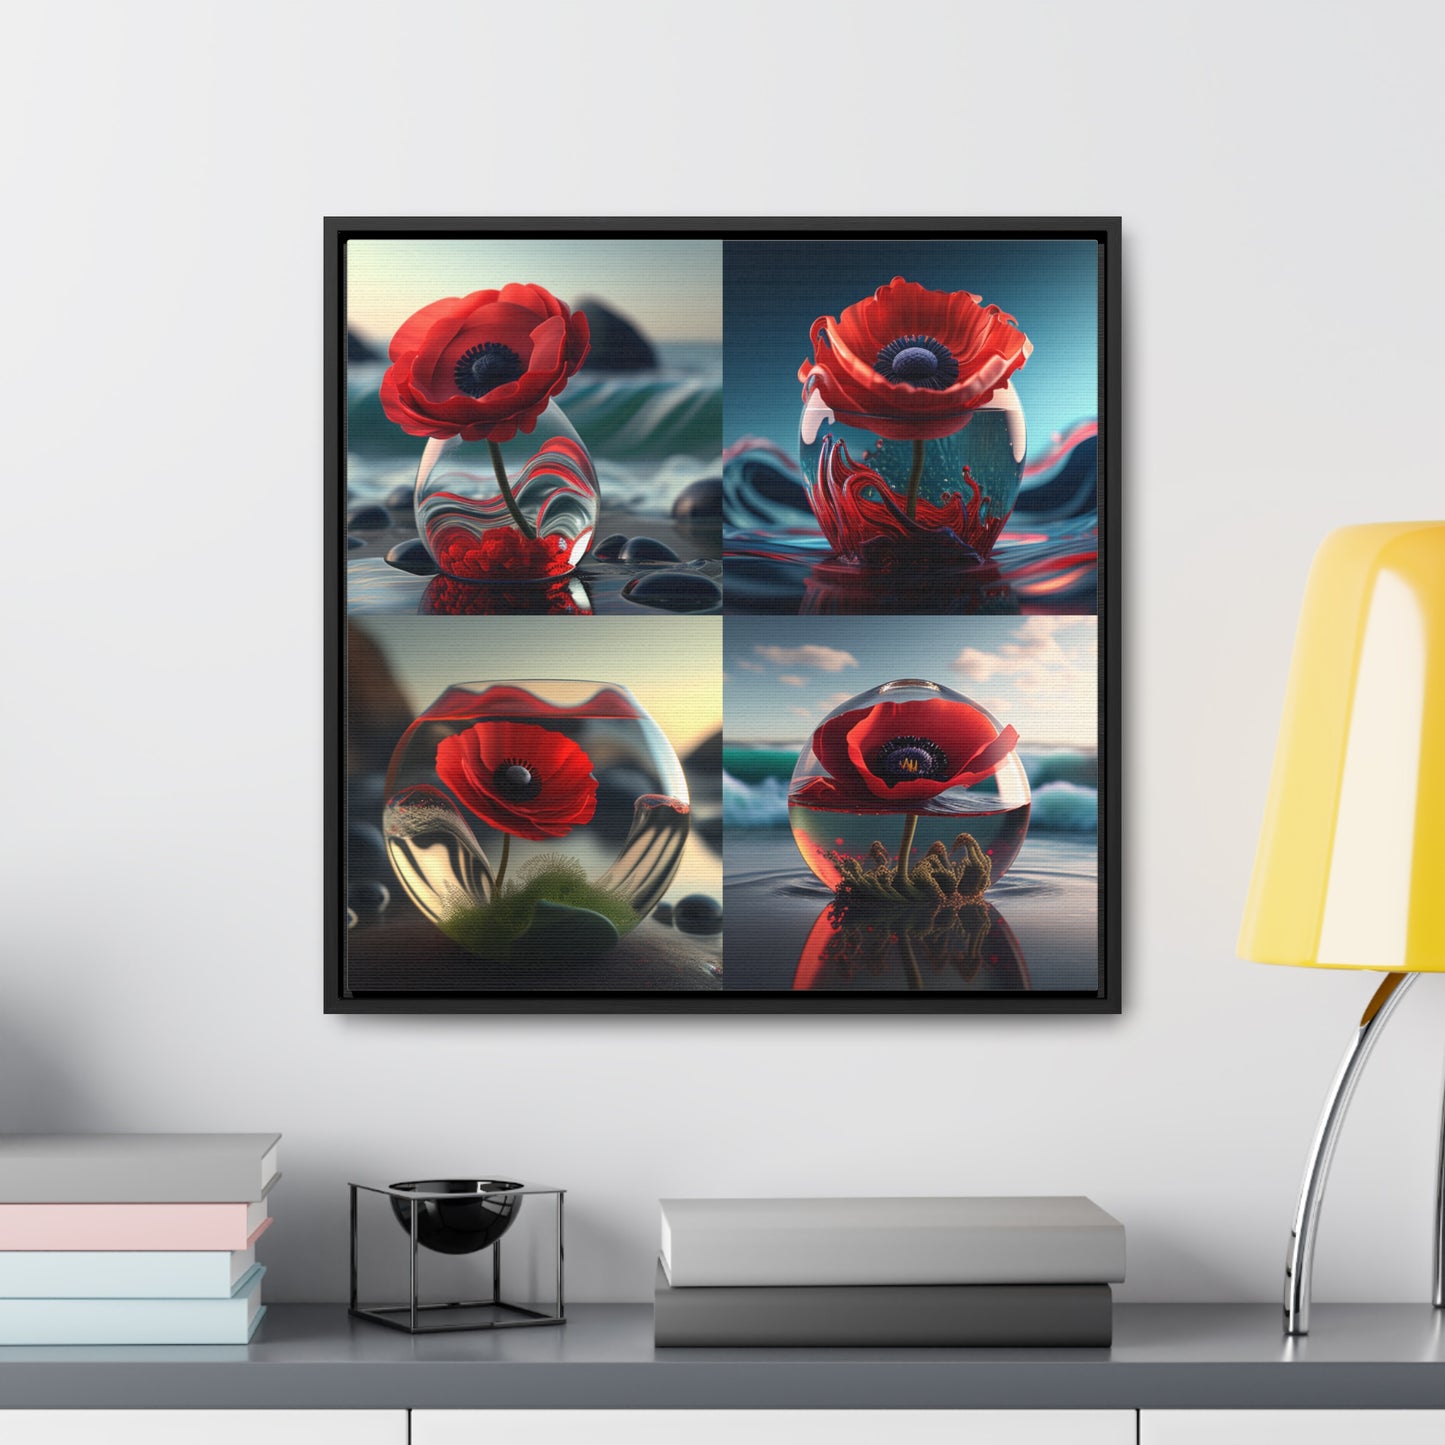 Gallery Canvas Wraps, Square Frame Red Anemone in a Vase 5